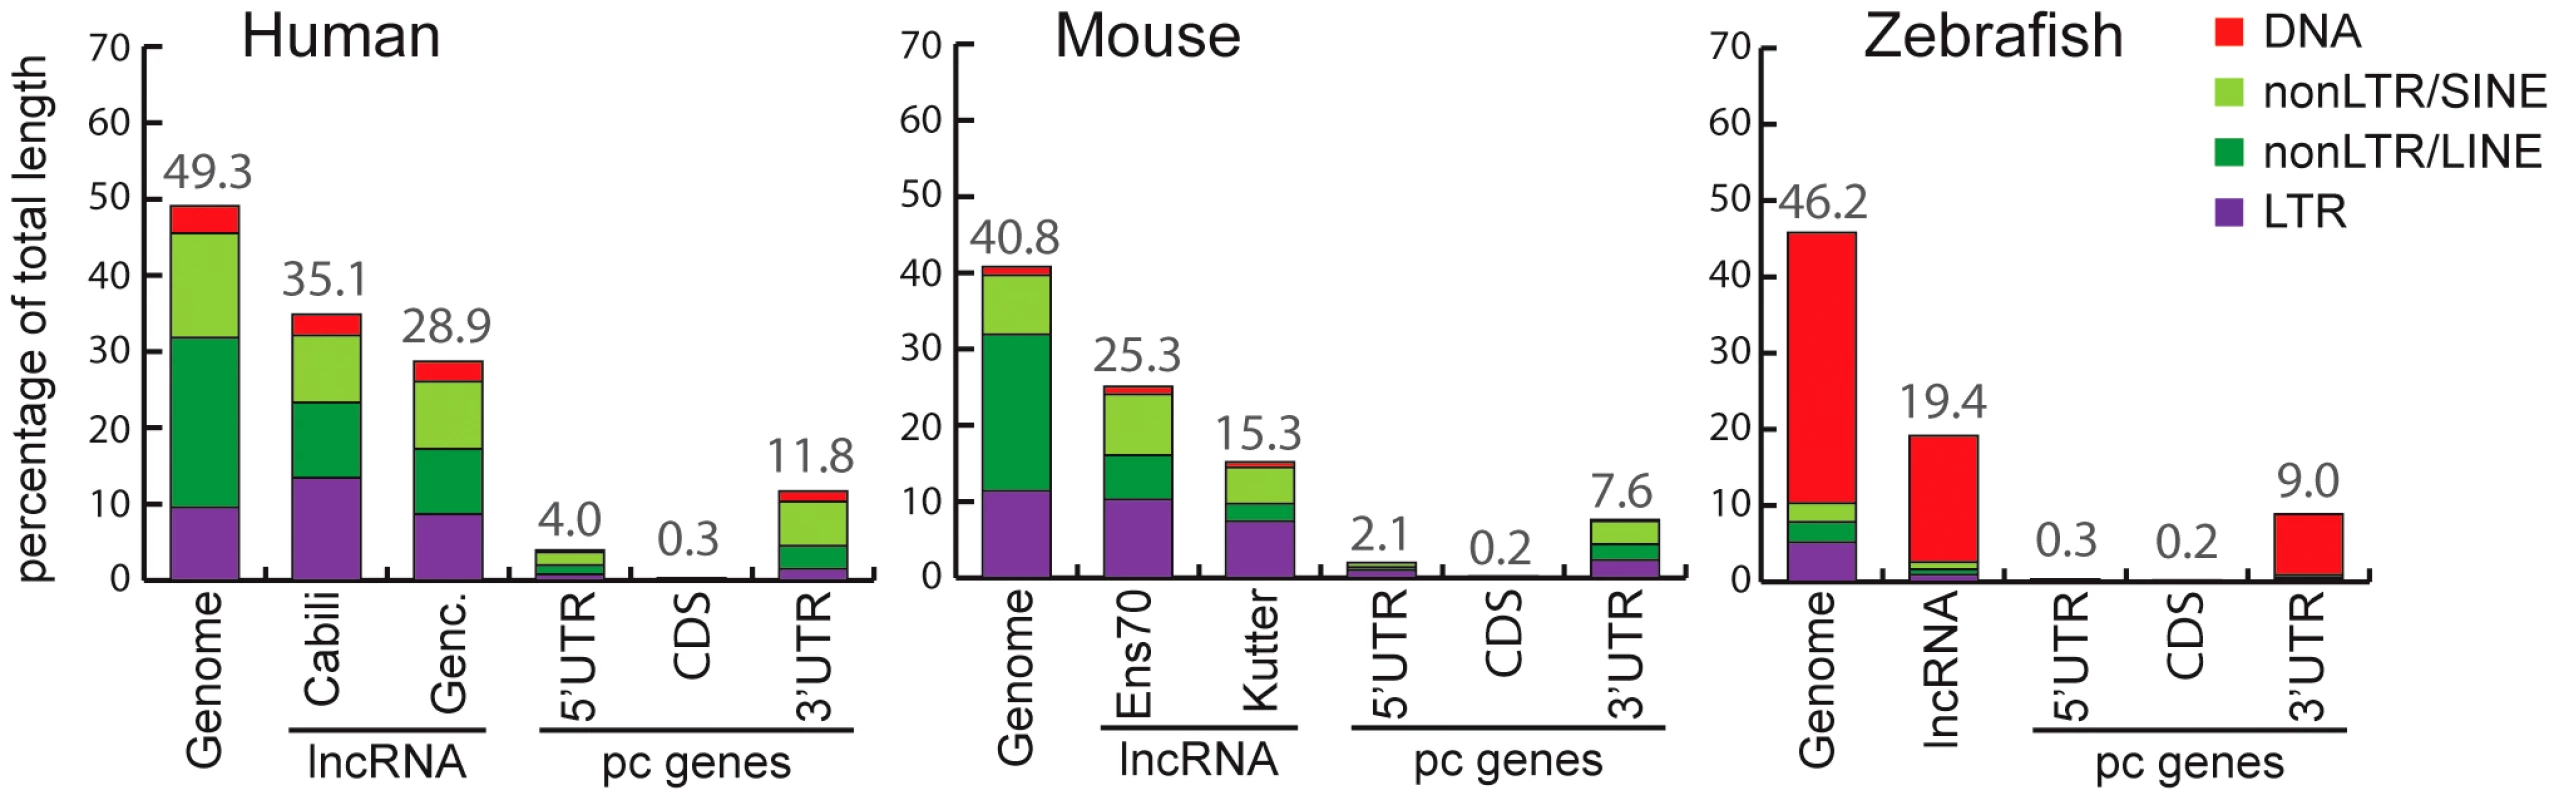 Coverage of different TE classes in genome, lncRNA, and protein-coding exons in human, mouse, and zebrafish.